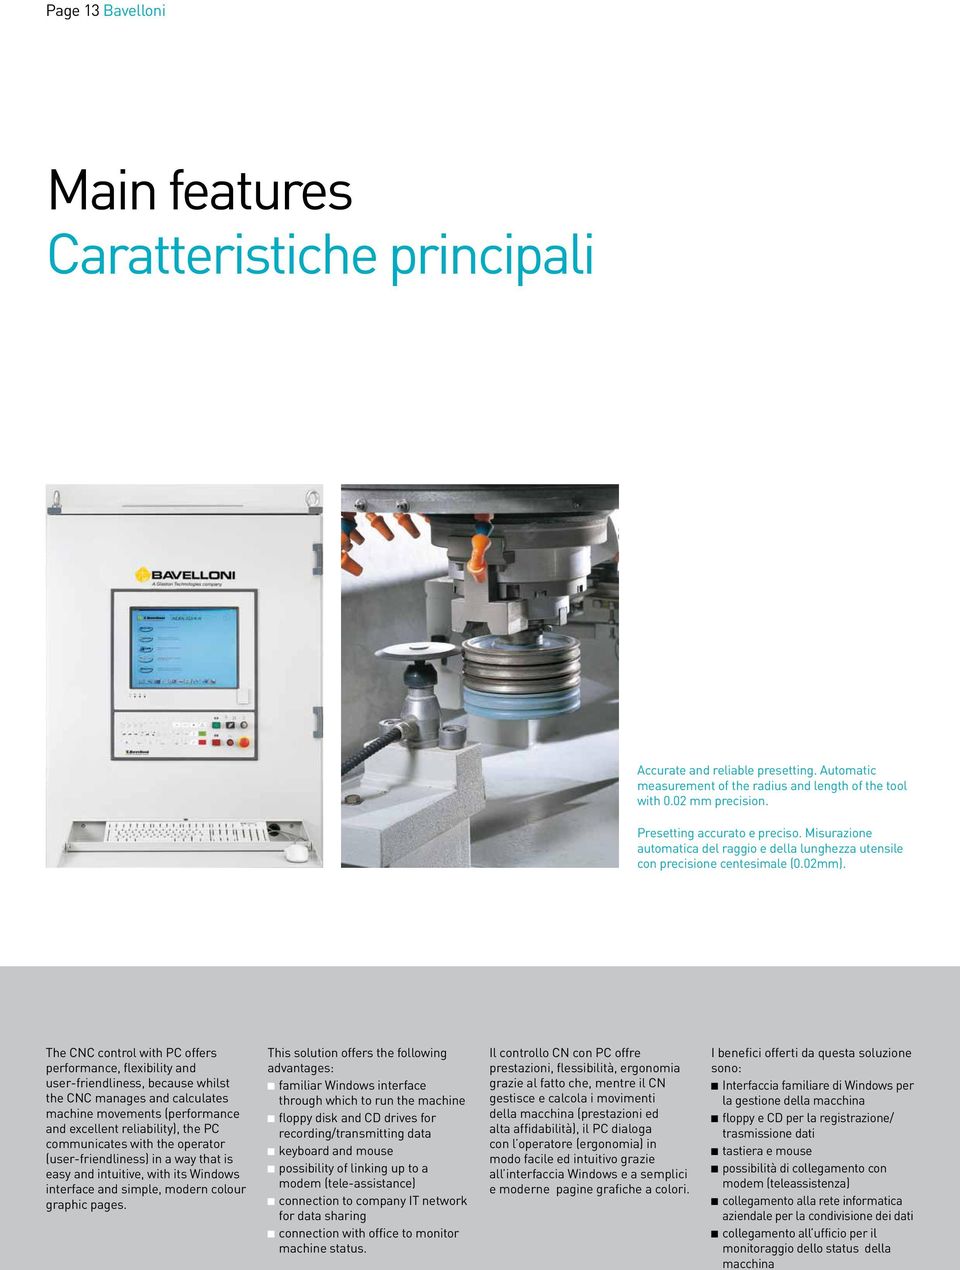 The CNC control with PC offers performance, flexibility and user-friendliness, because whilst the CNC manages and calculates machine movements (performance and excellent reliability), the PC